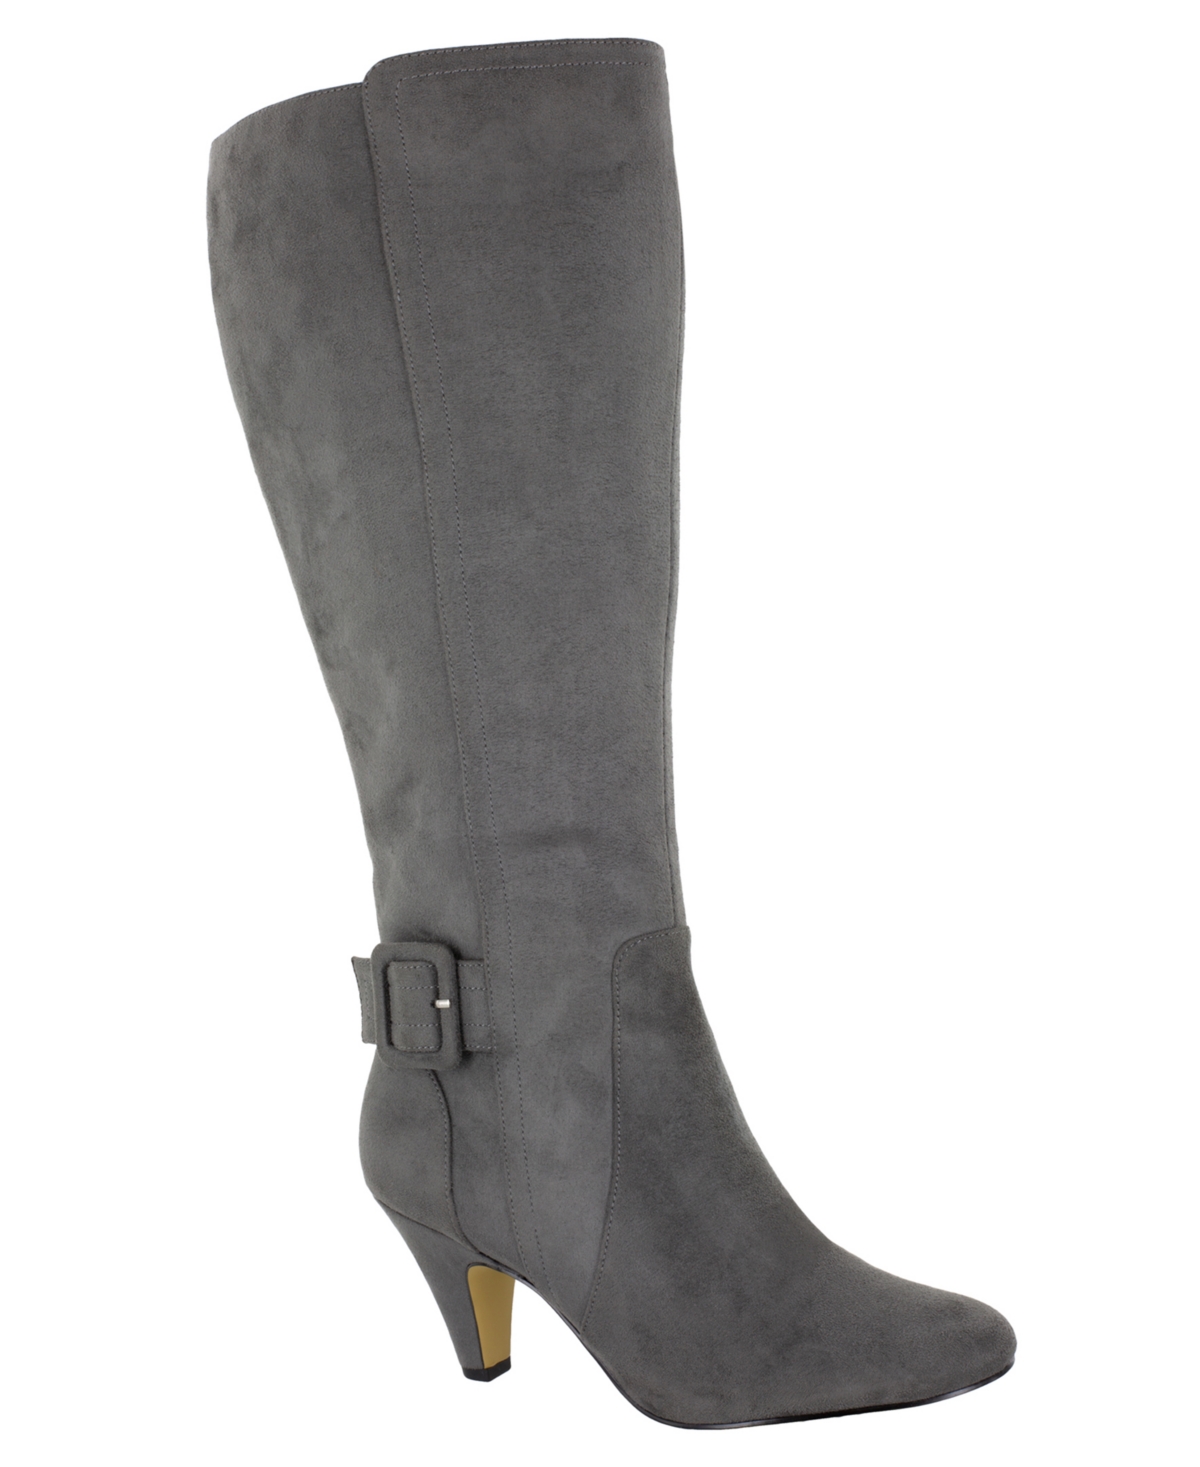 Troy Ii Wide Calf Tall Dress Boots - Grey Super Suede